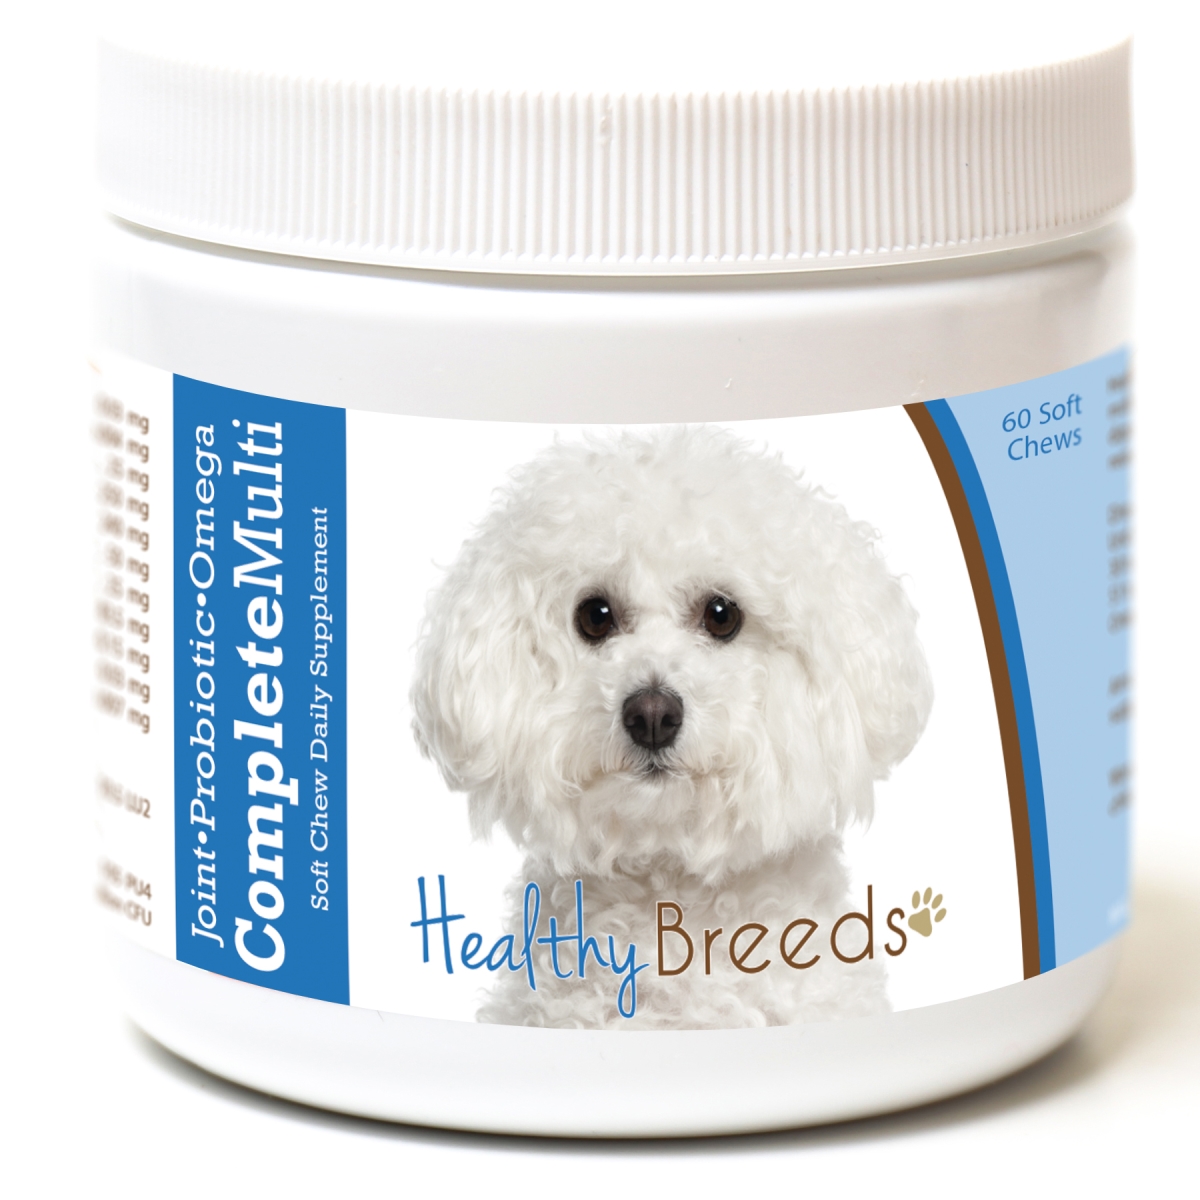 Picture of Healthy Breeds 192959007411 Bichon Frise All in One Multivitamin Soft Chew - 60 Count